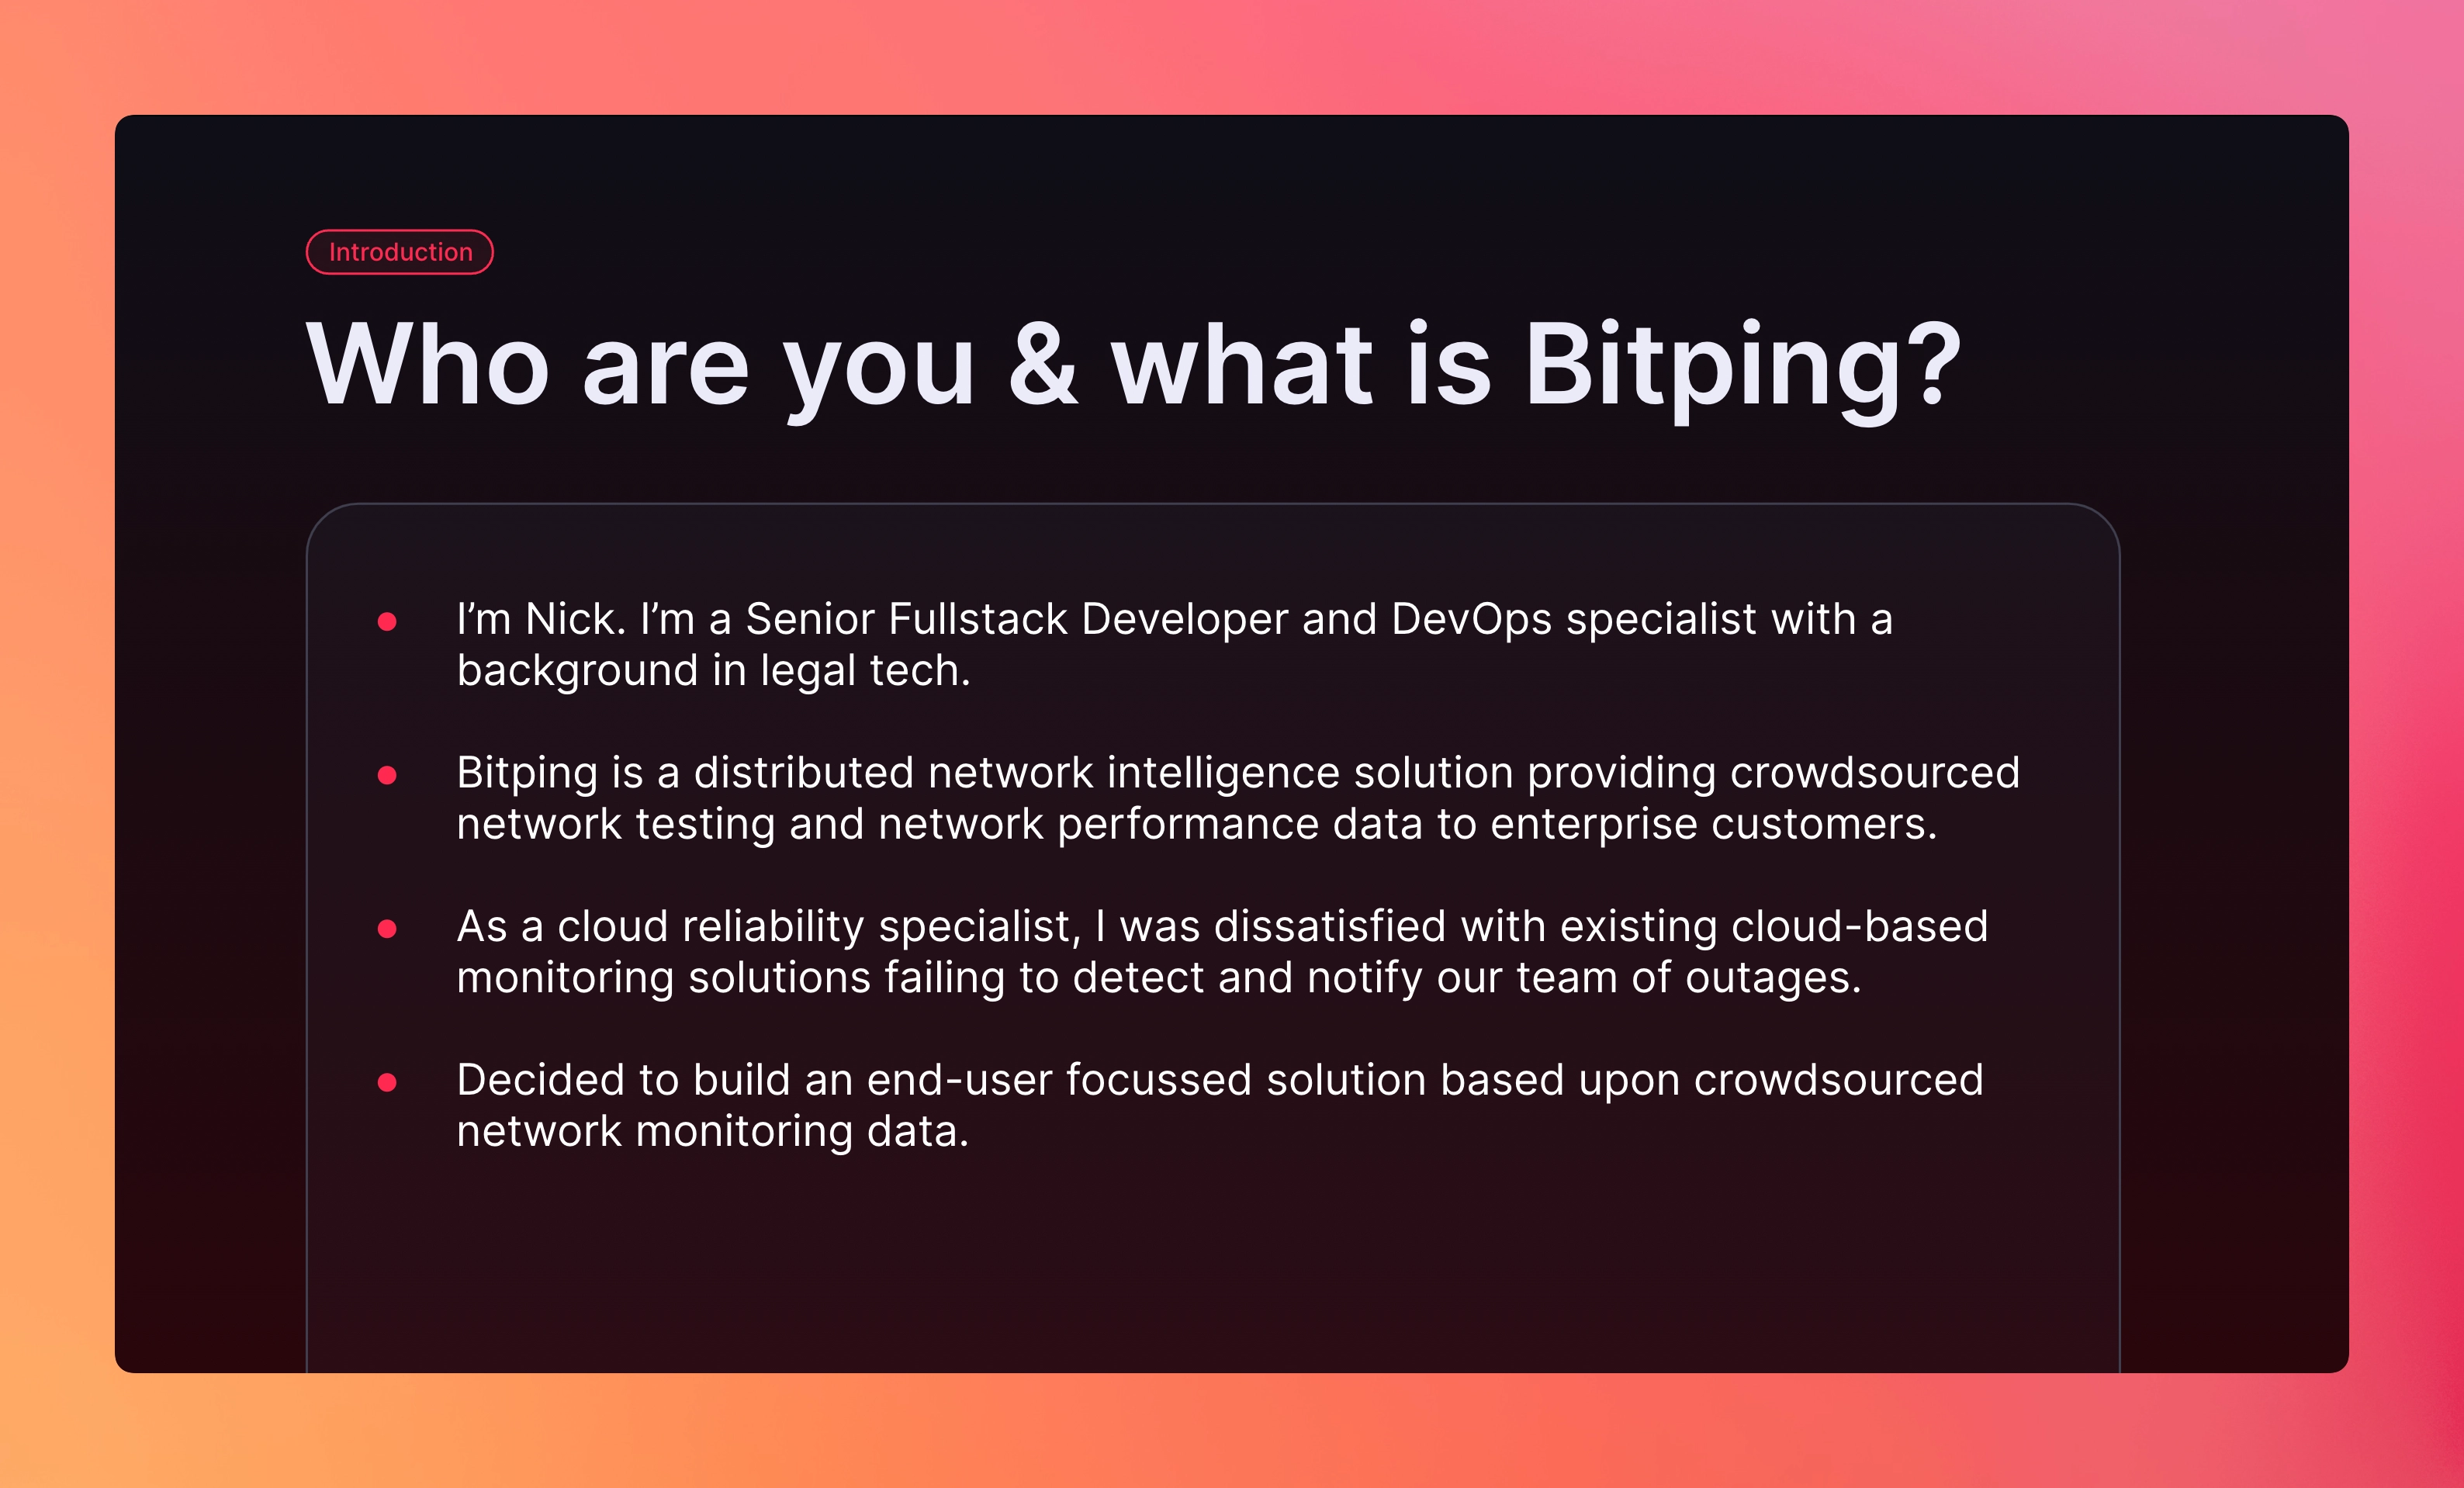 Who am I and what is Bitping?